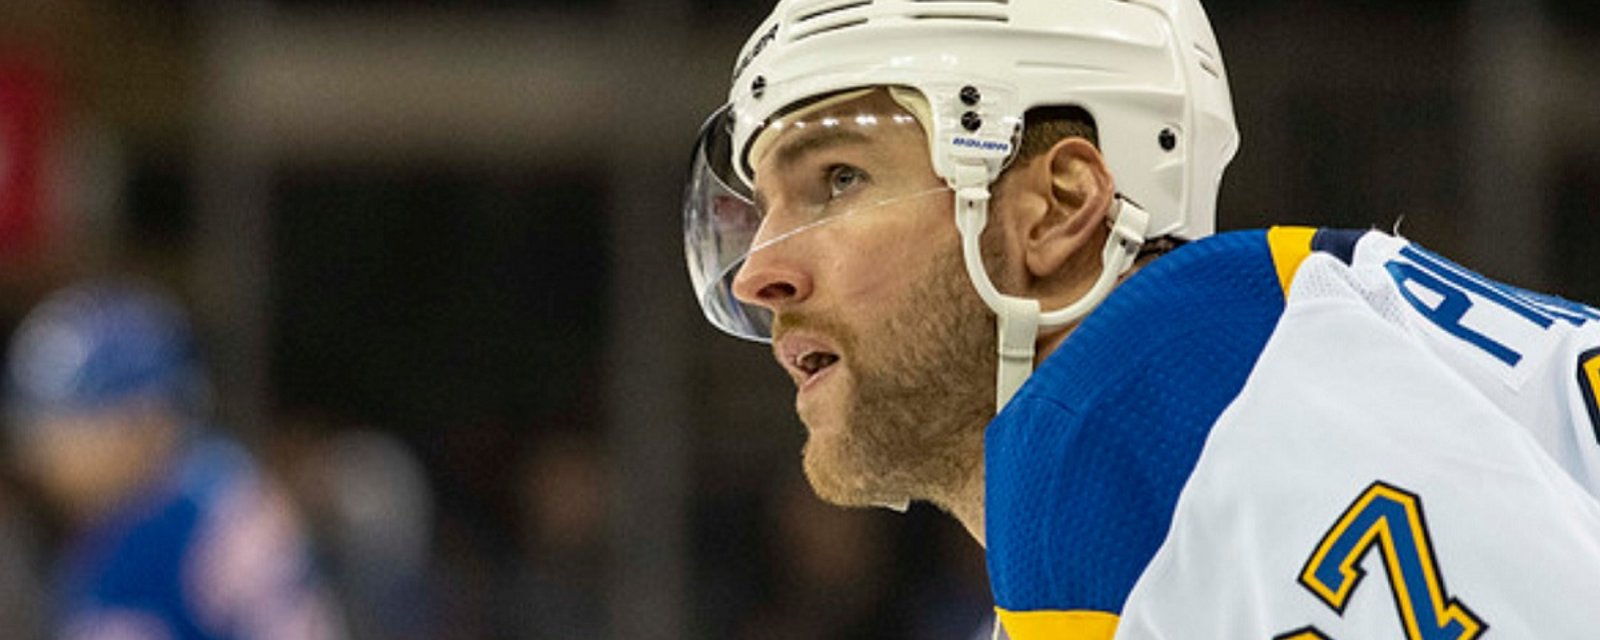 Rumor: Early signs point to Pietrangelo leaving the Blues.